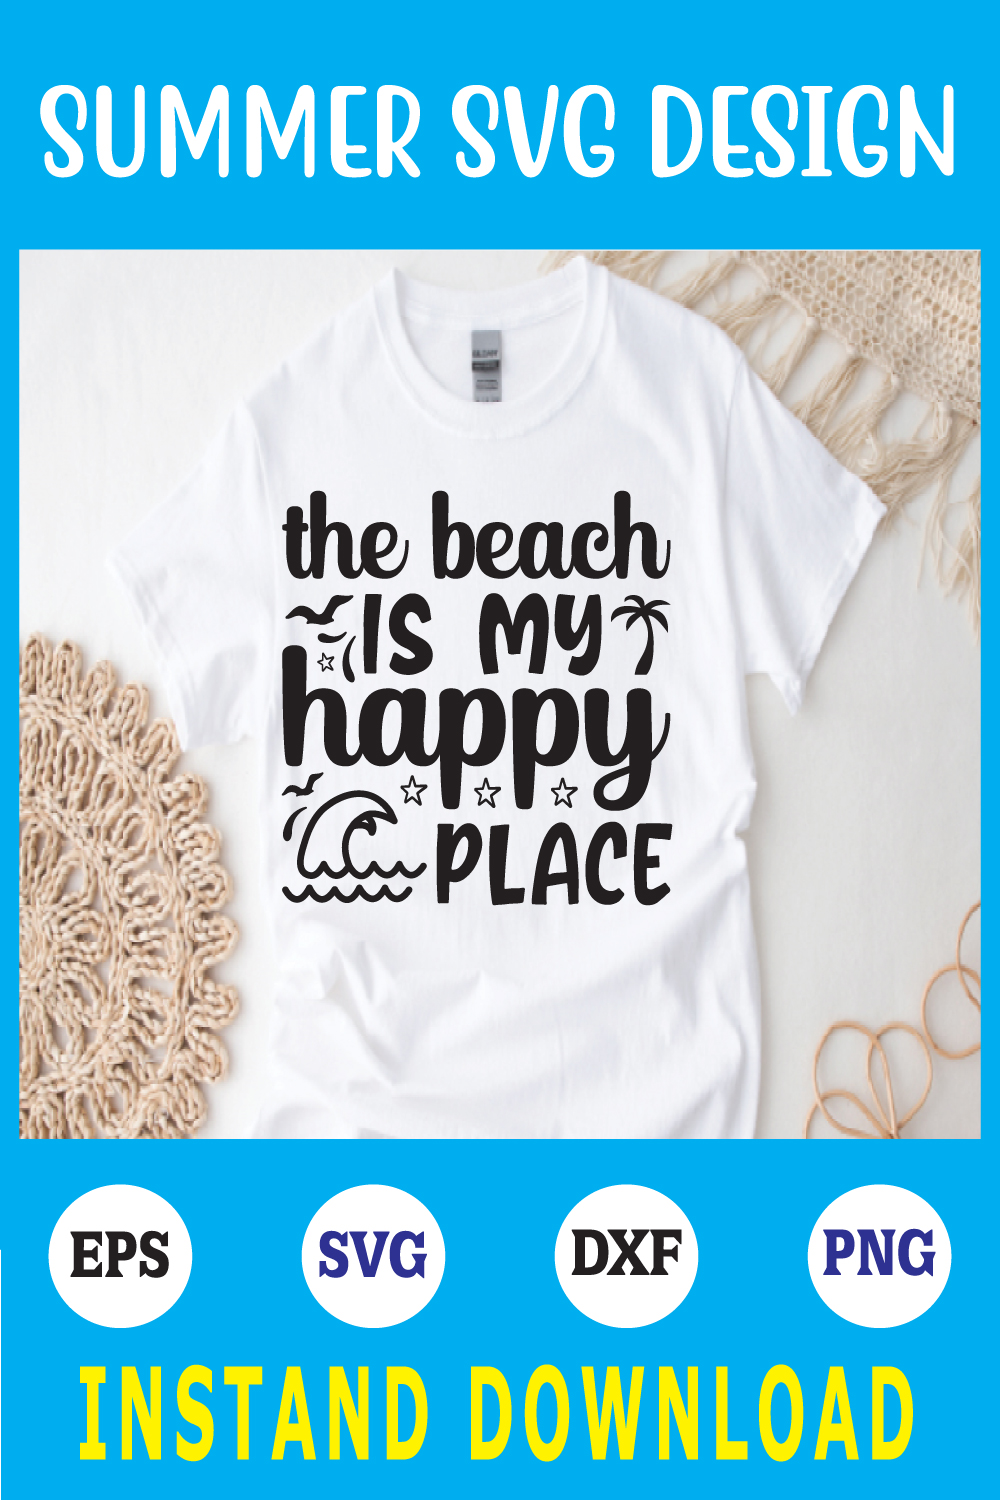 the beach is my happy place svg pinterest preview image.